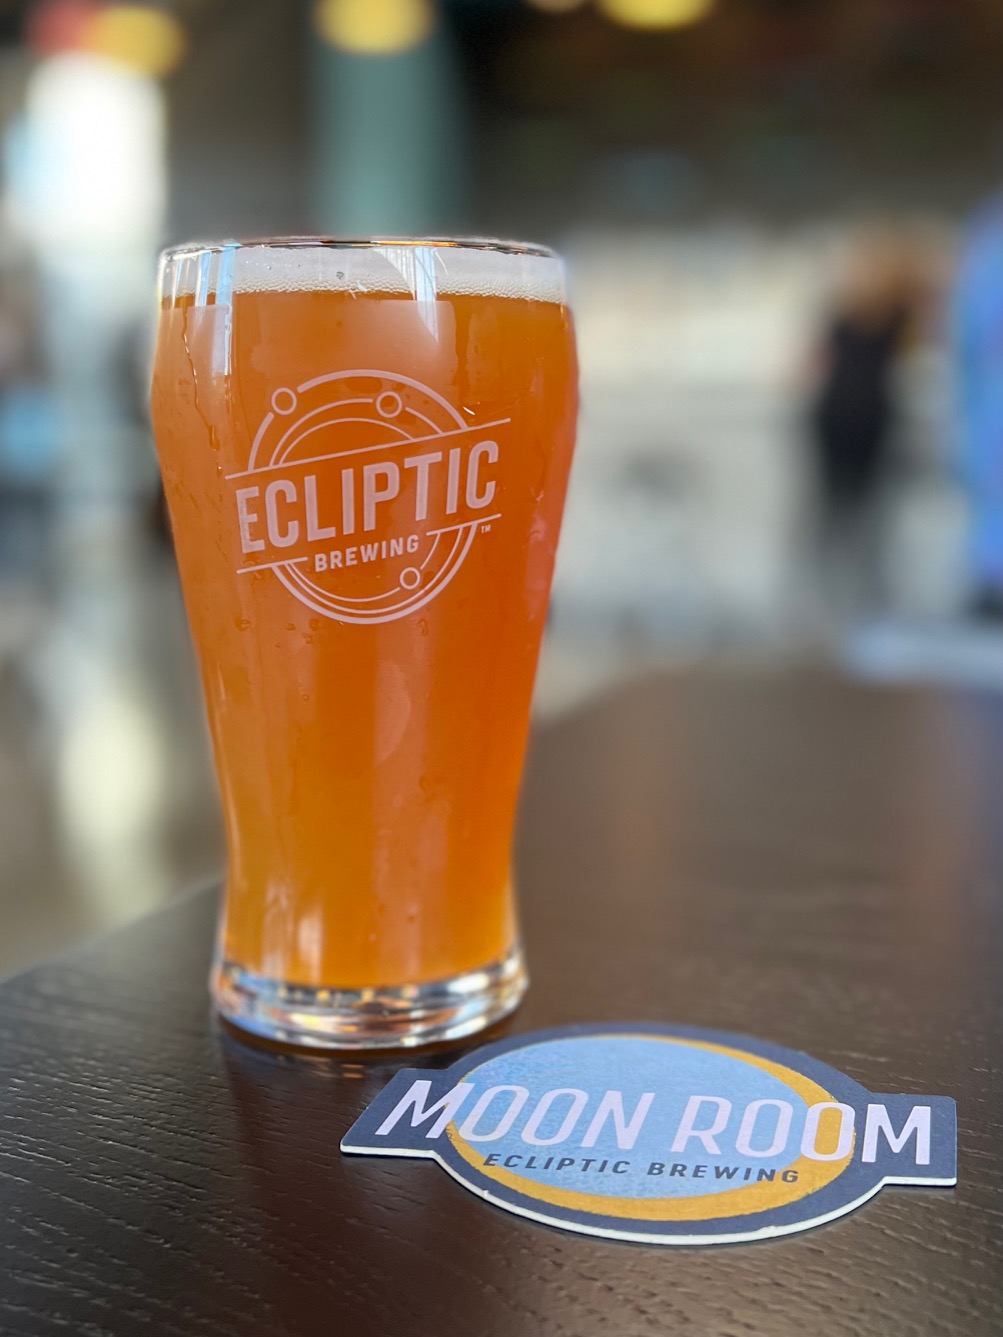 A pint of Filament Winter IPA from Ecliptic Brewing at its Moon Room in Southeast Portland.